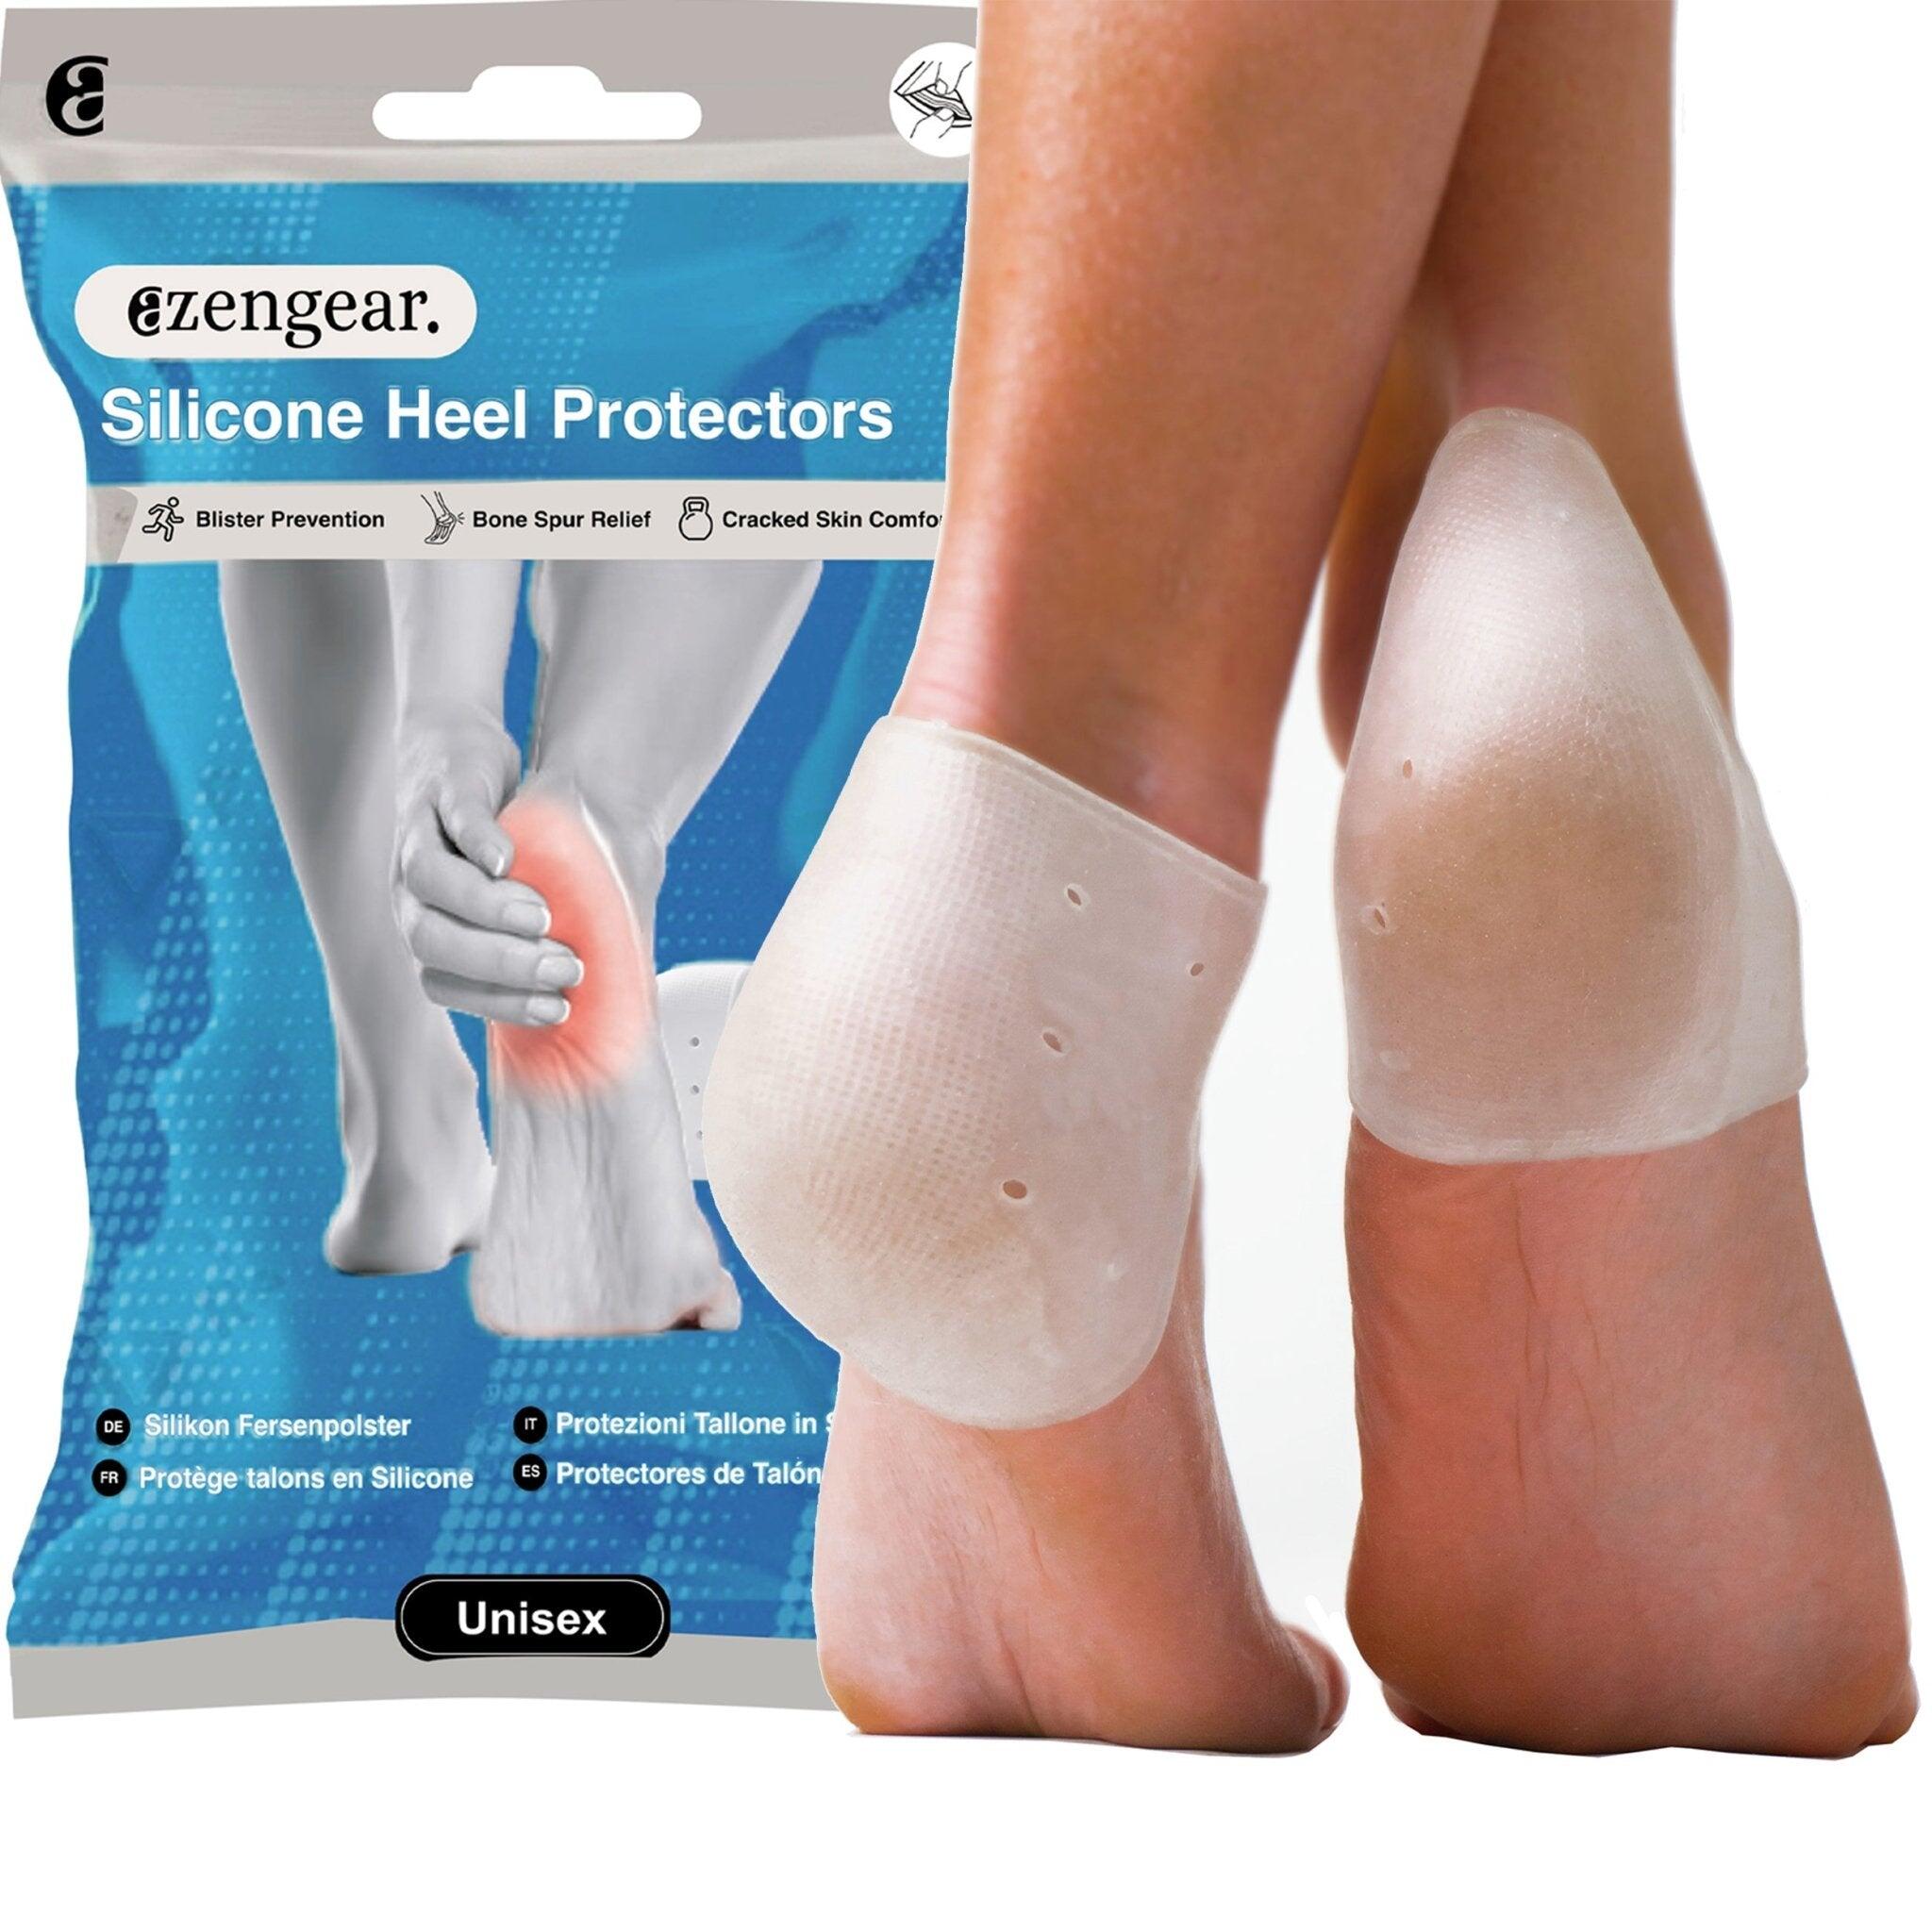 AZENGEAR Silicone Gel Heel Protectors (2 Pairs) to Prevent Blisters and Cracked Heels